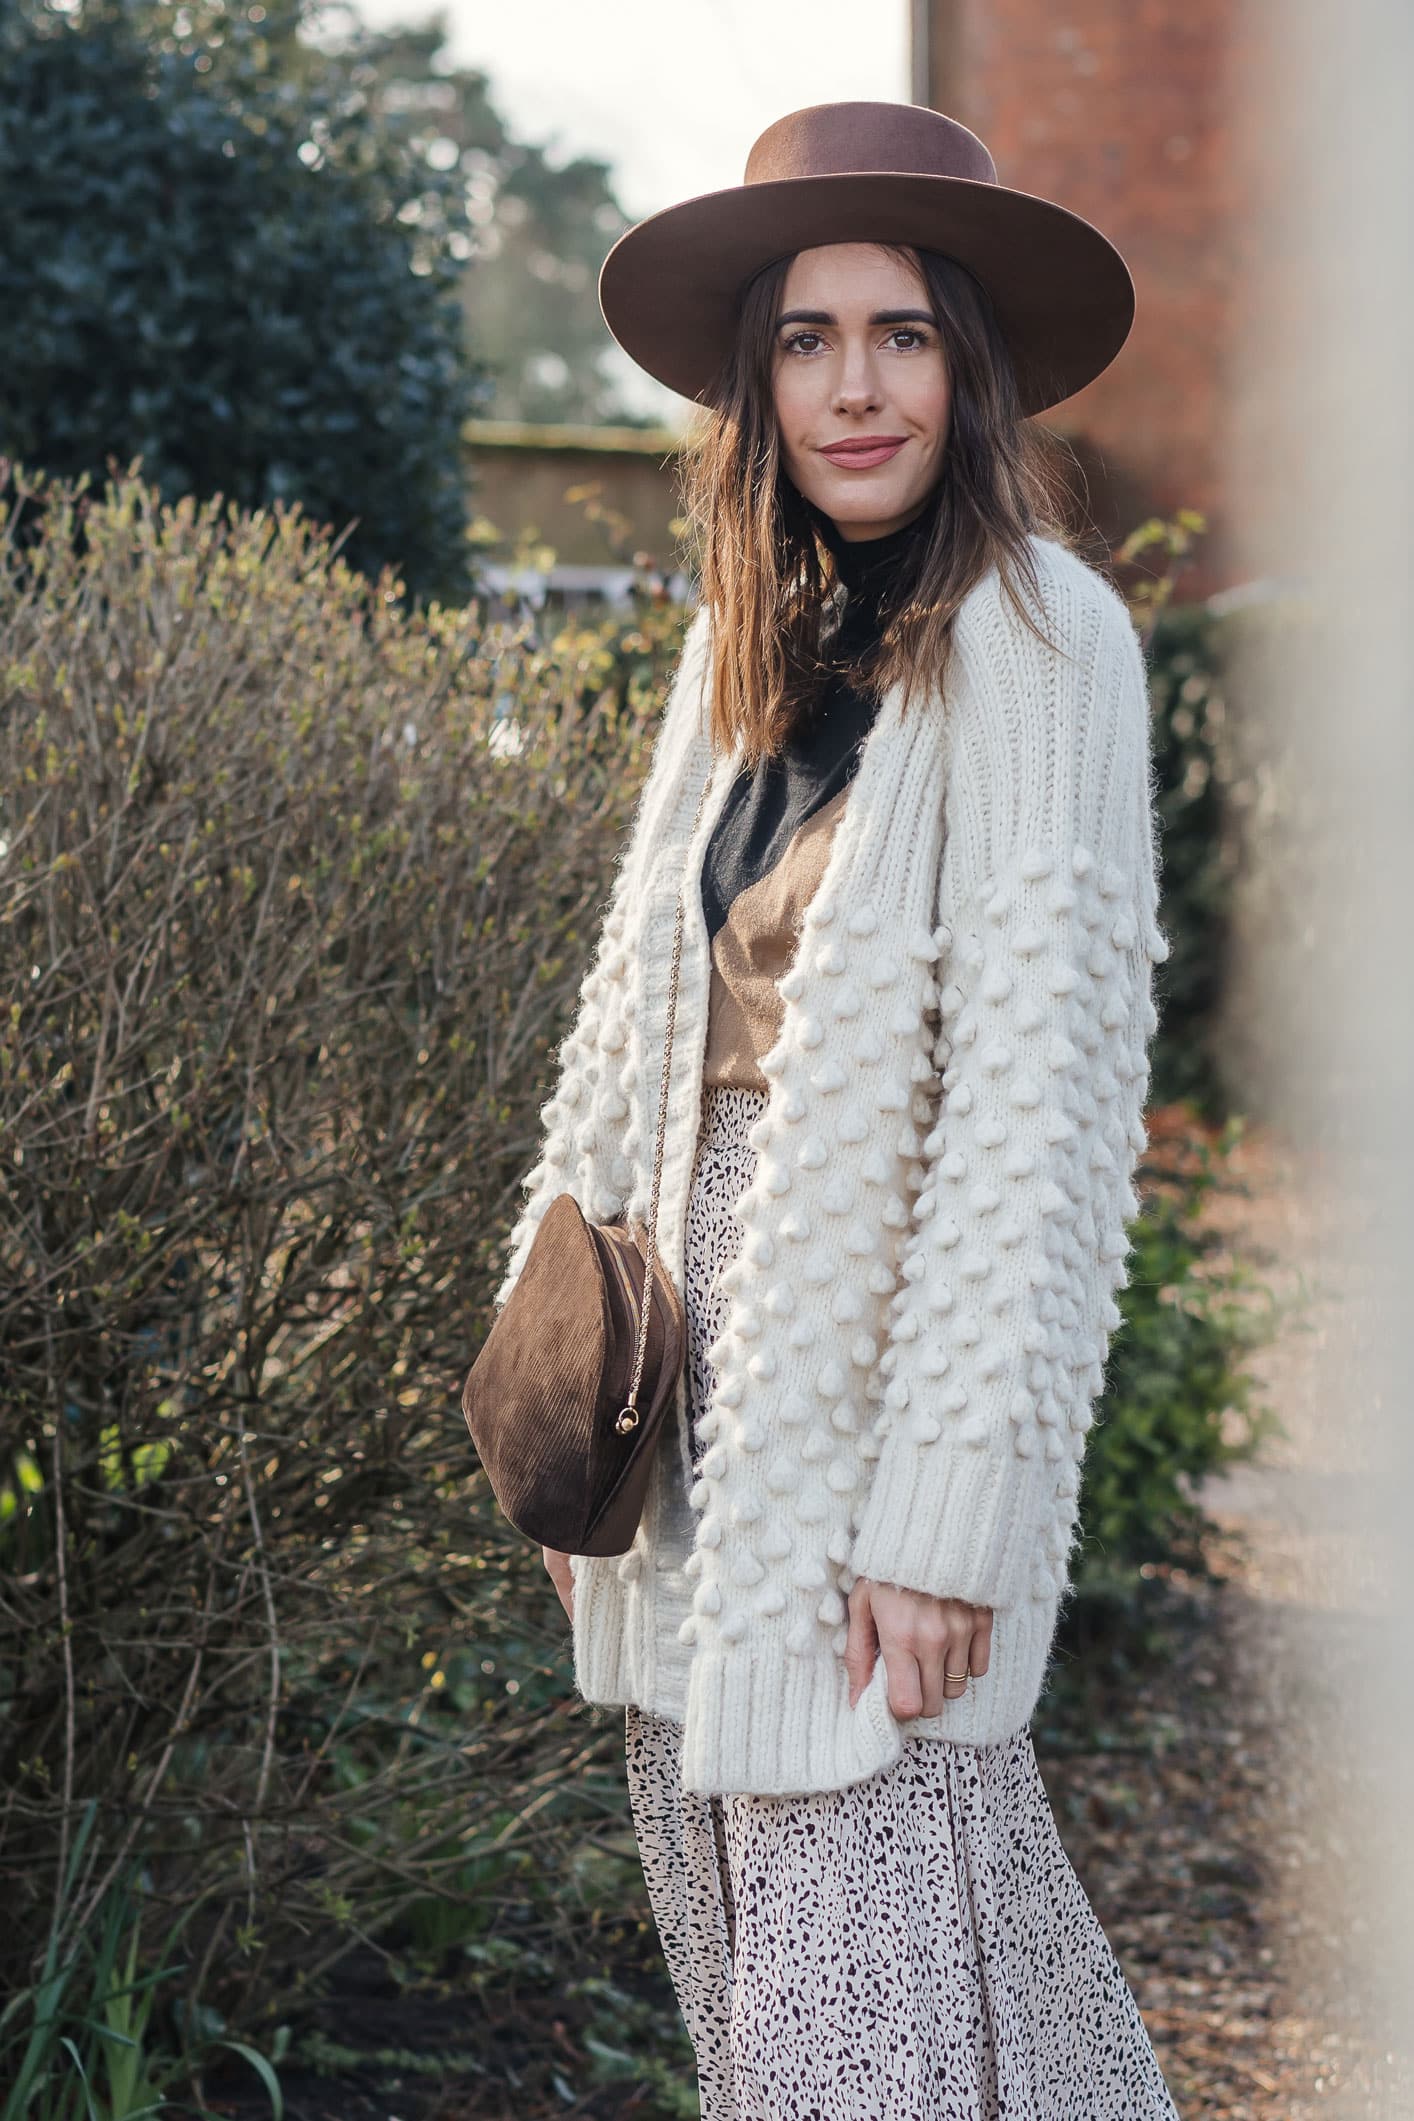 Hats For Windswept Days - Front Roe by Louise Roe